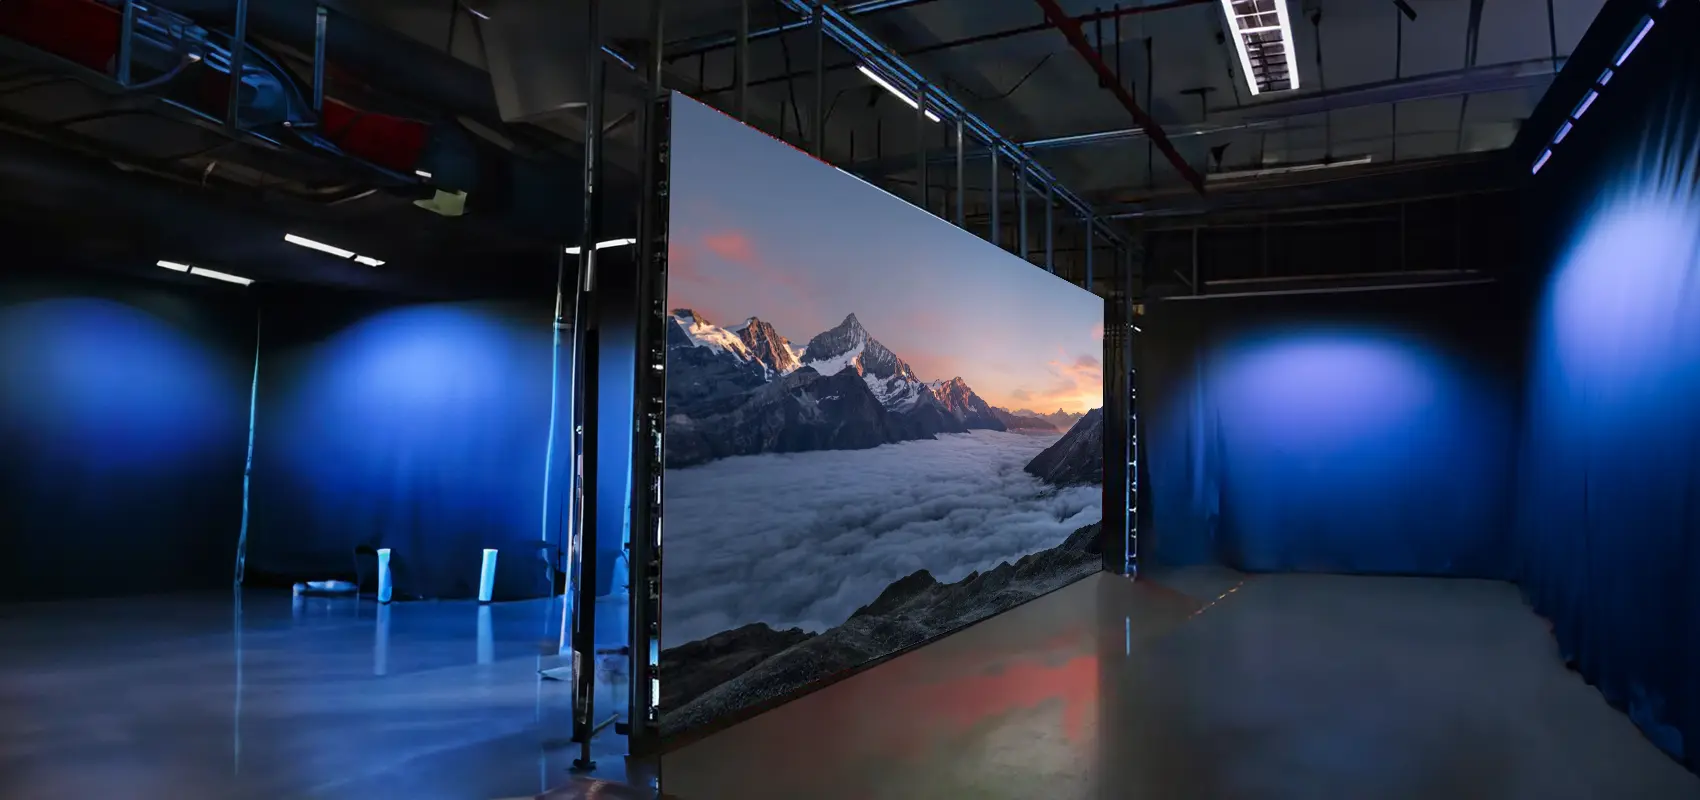 LED Video Wall showing a mountain scenery.